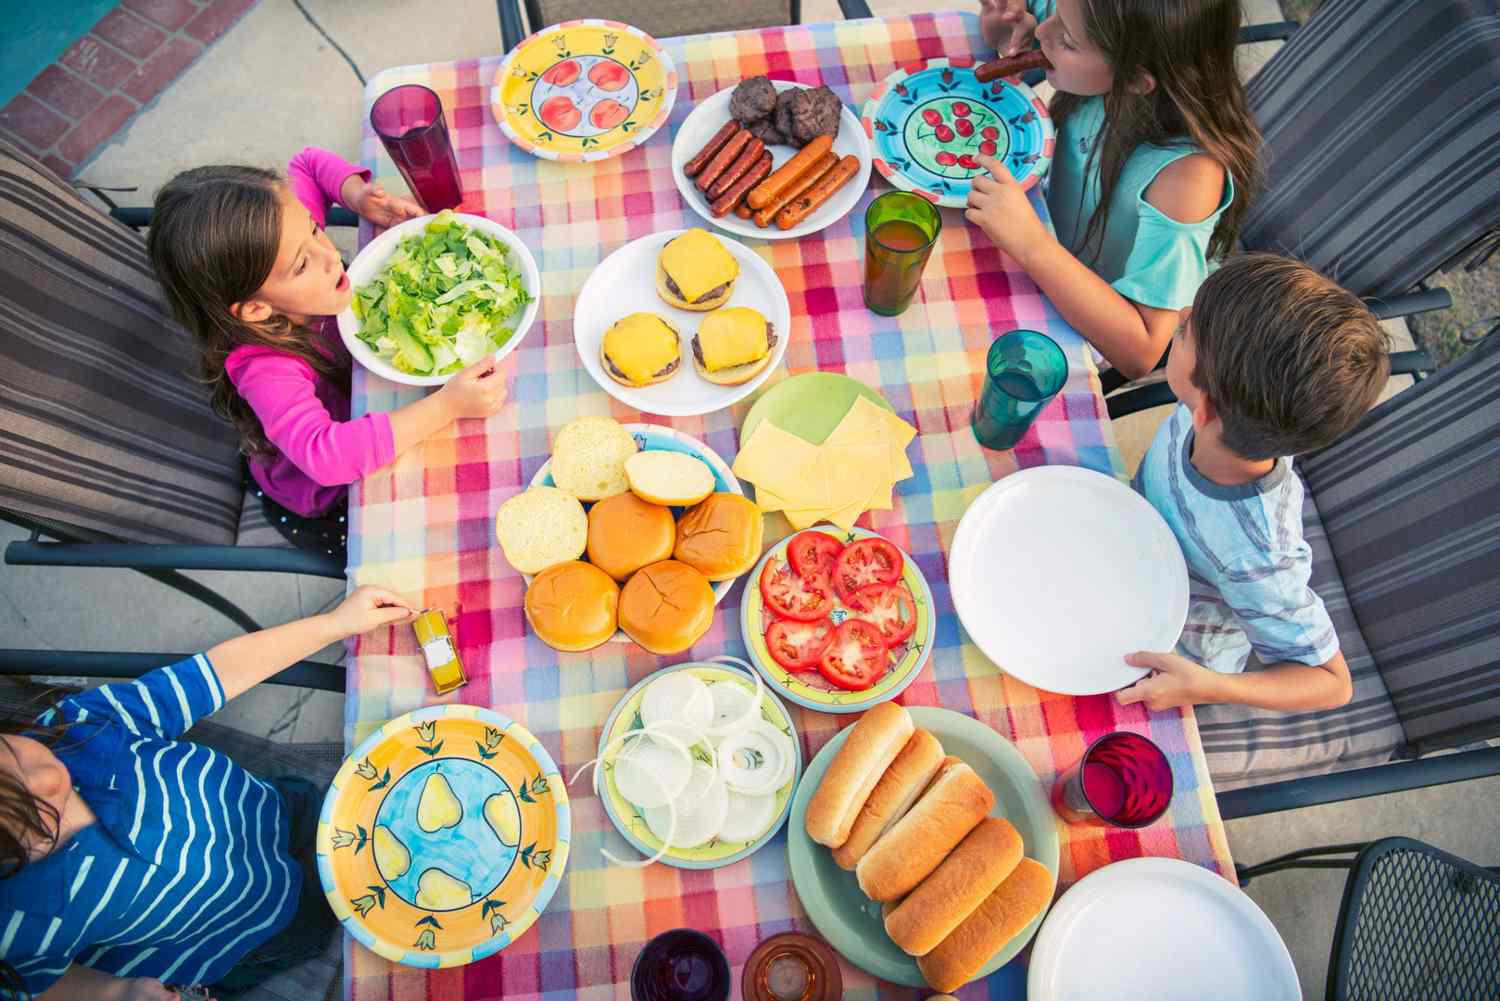 An image of a summer dinner table.